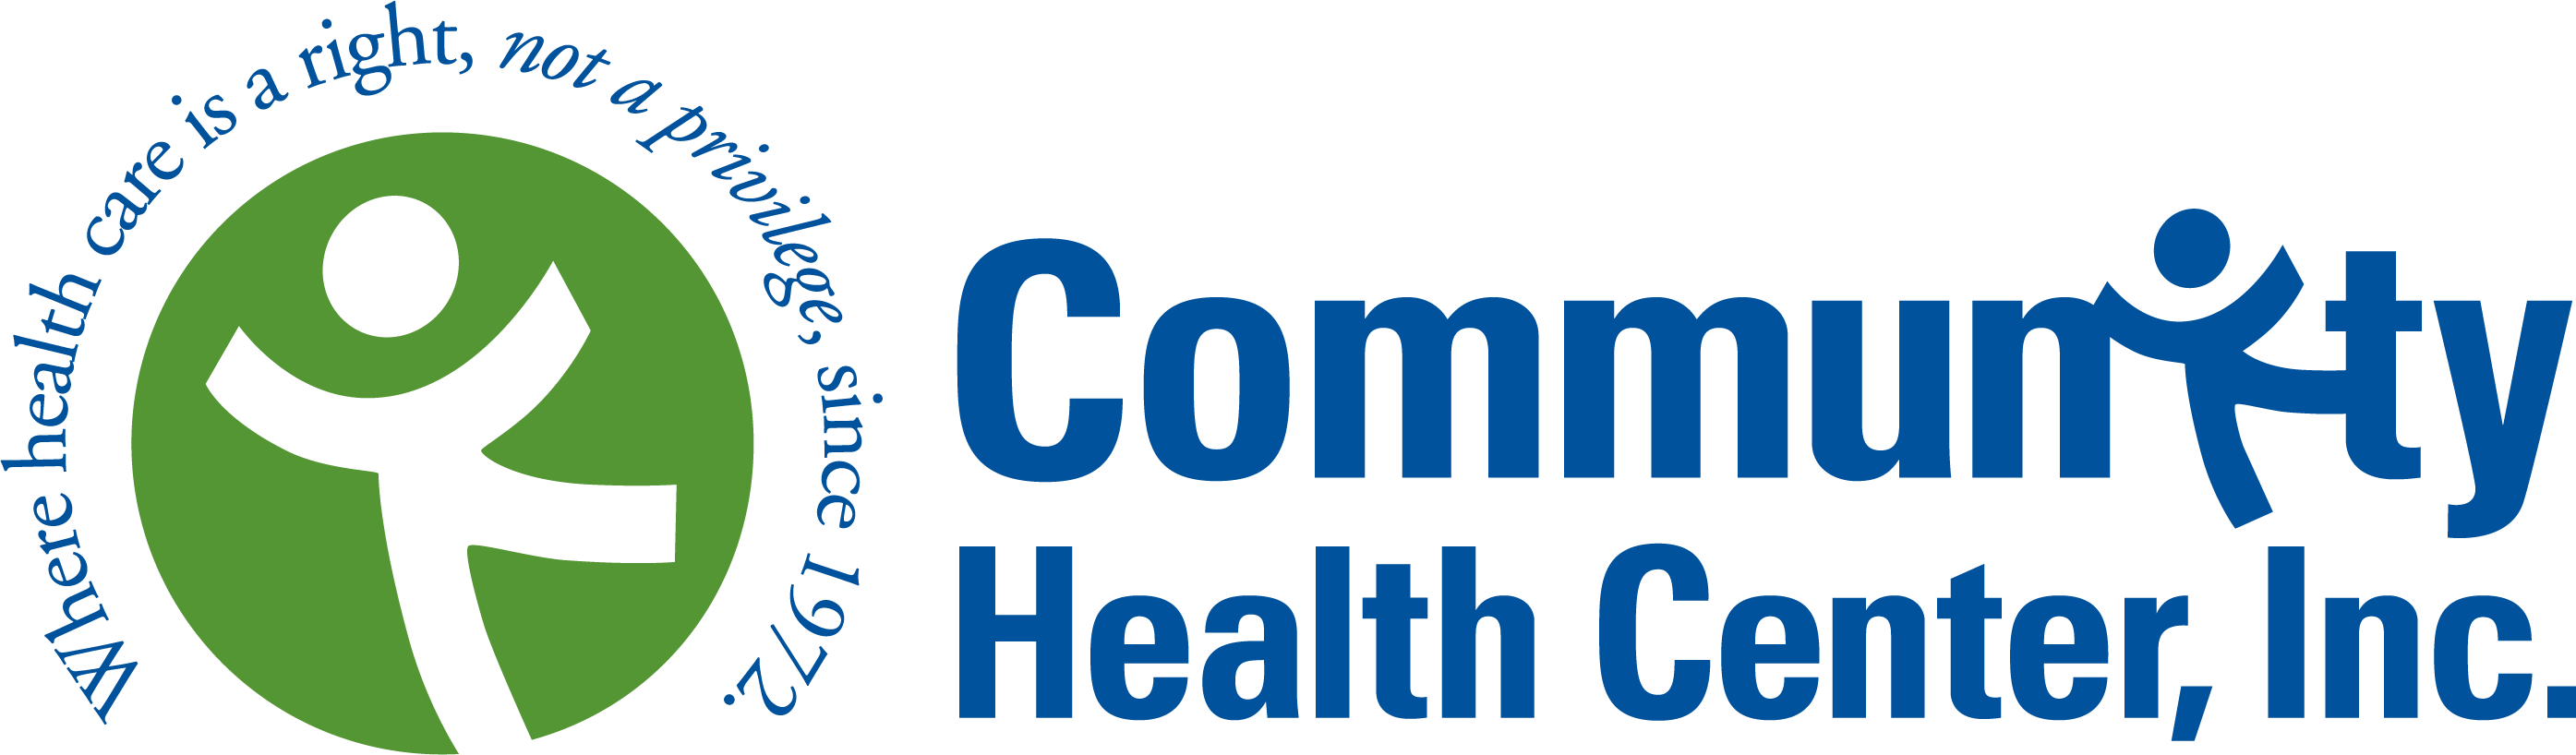 community health center written out with stick figure logo